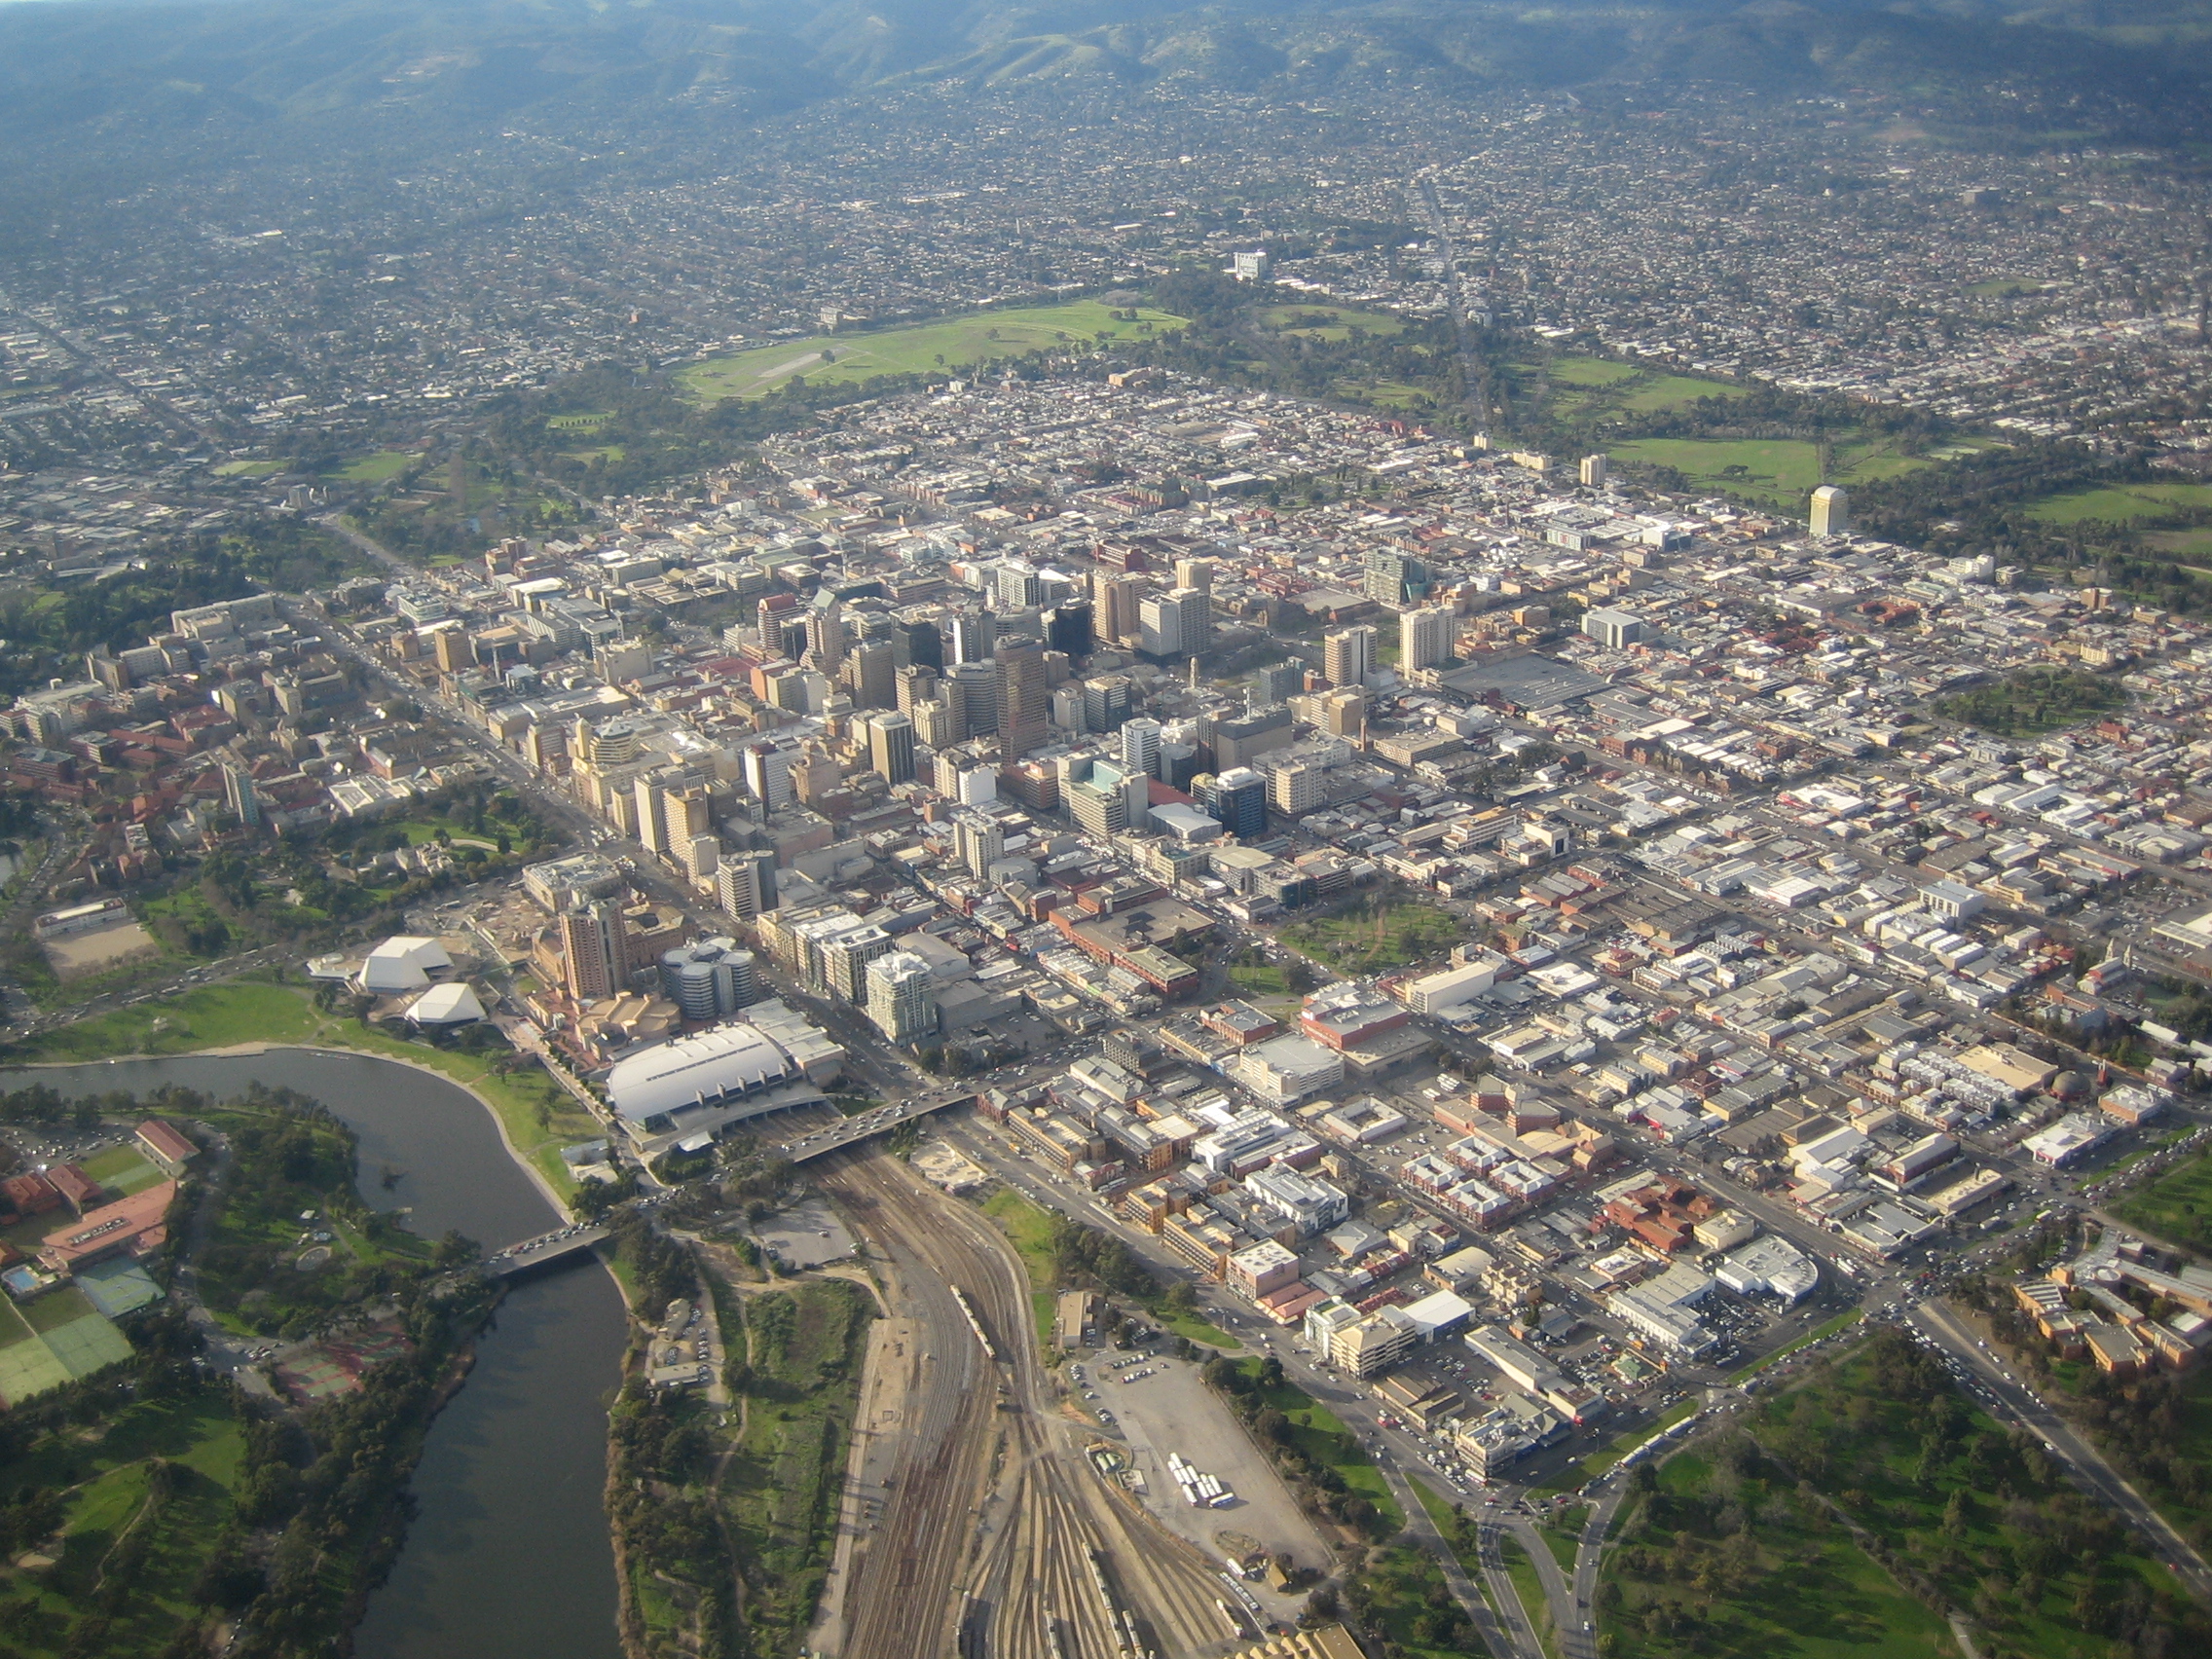 Adelaide is a compact city which is surrounded by 930 hectares of parkland